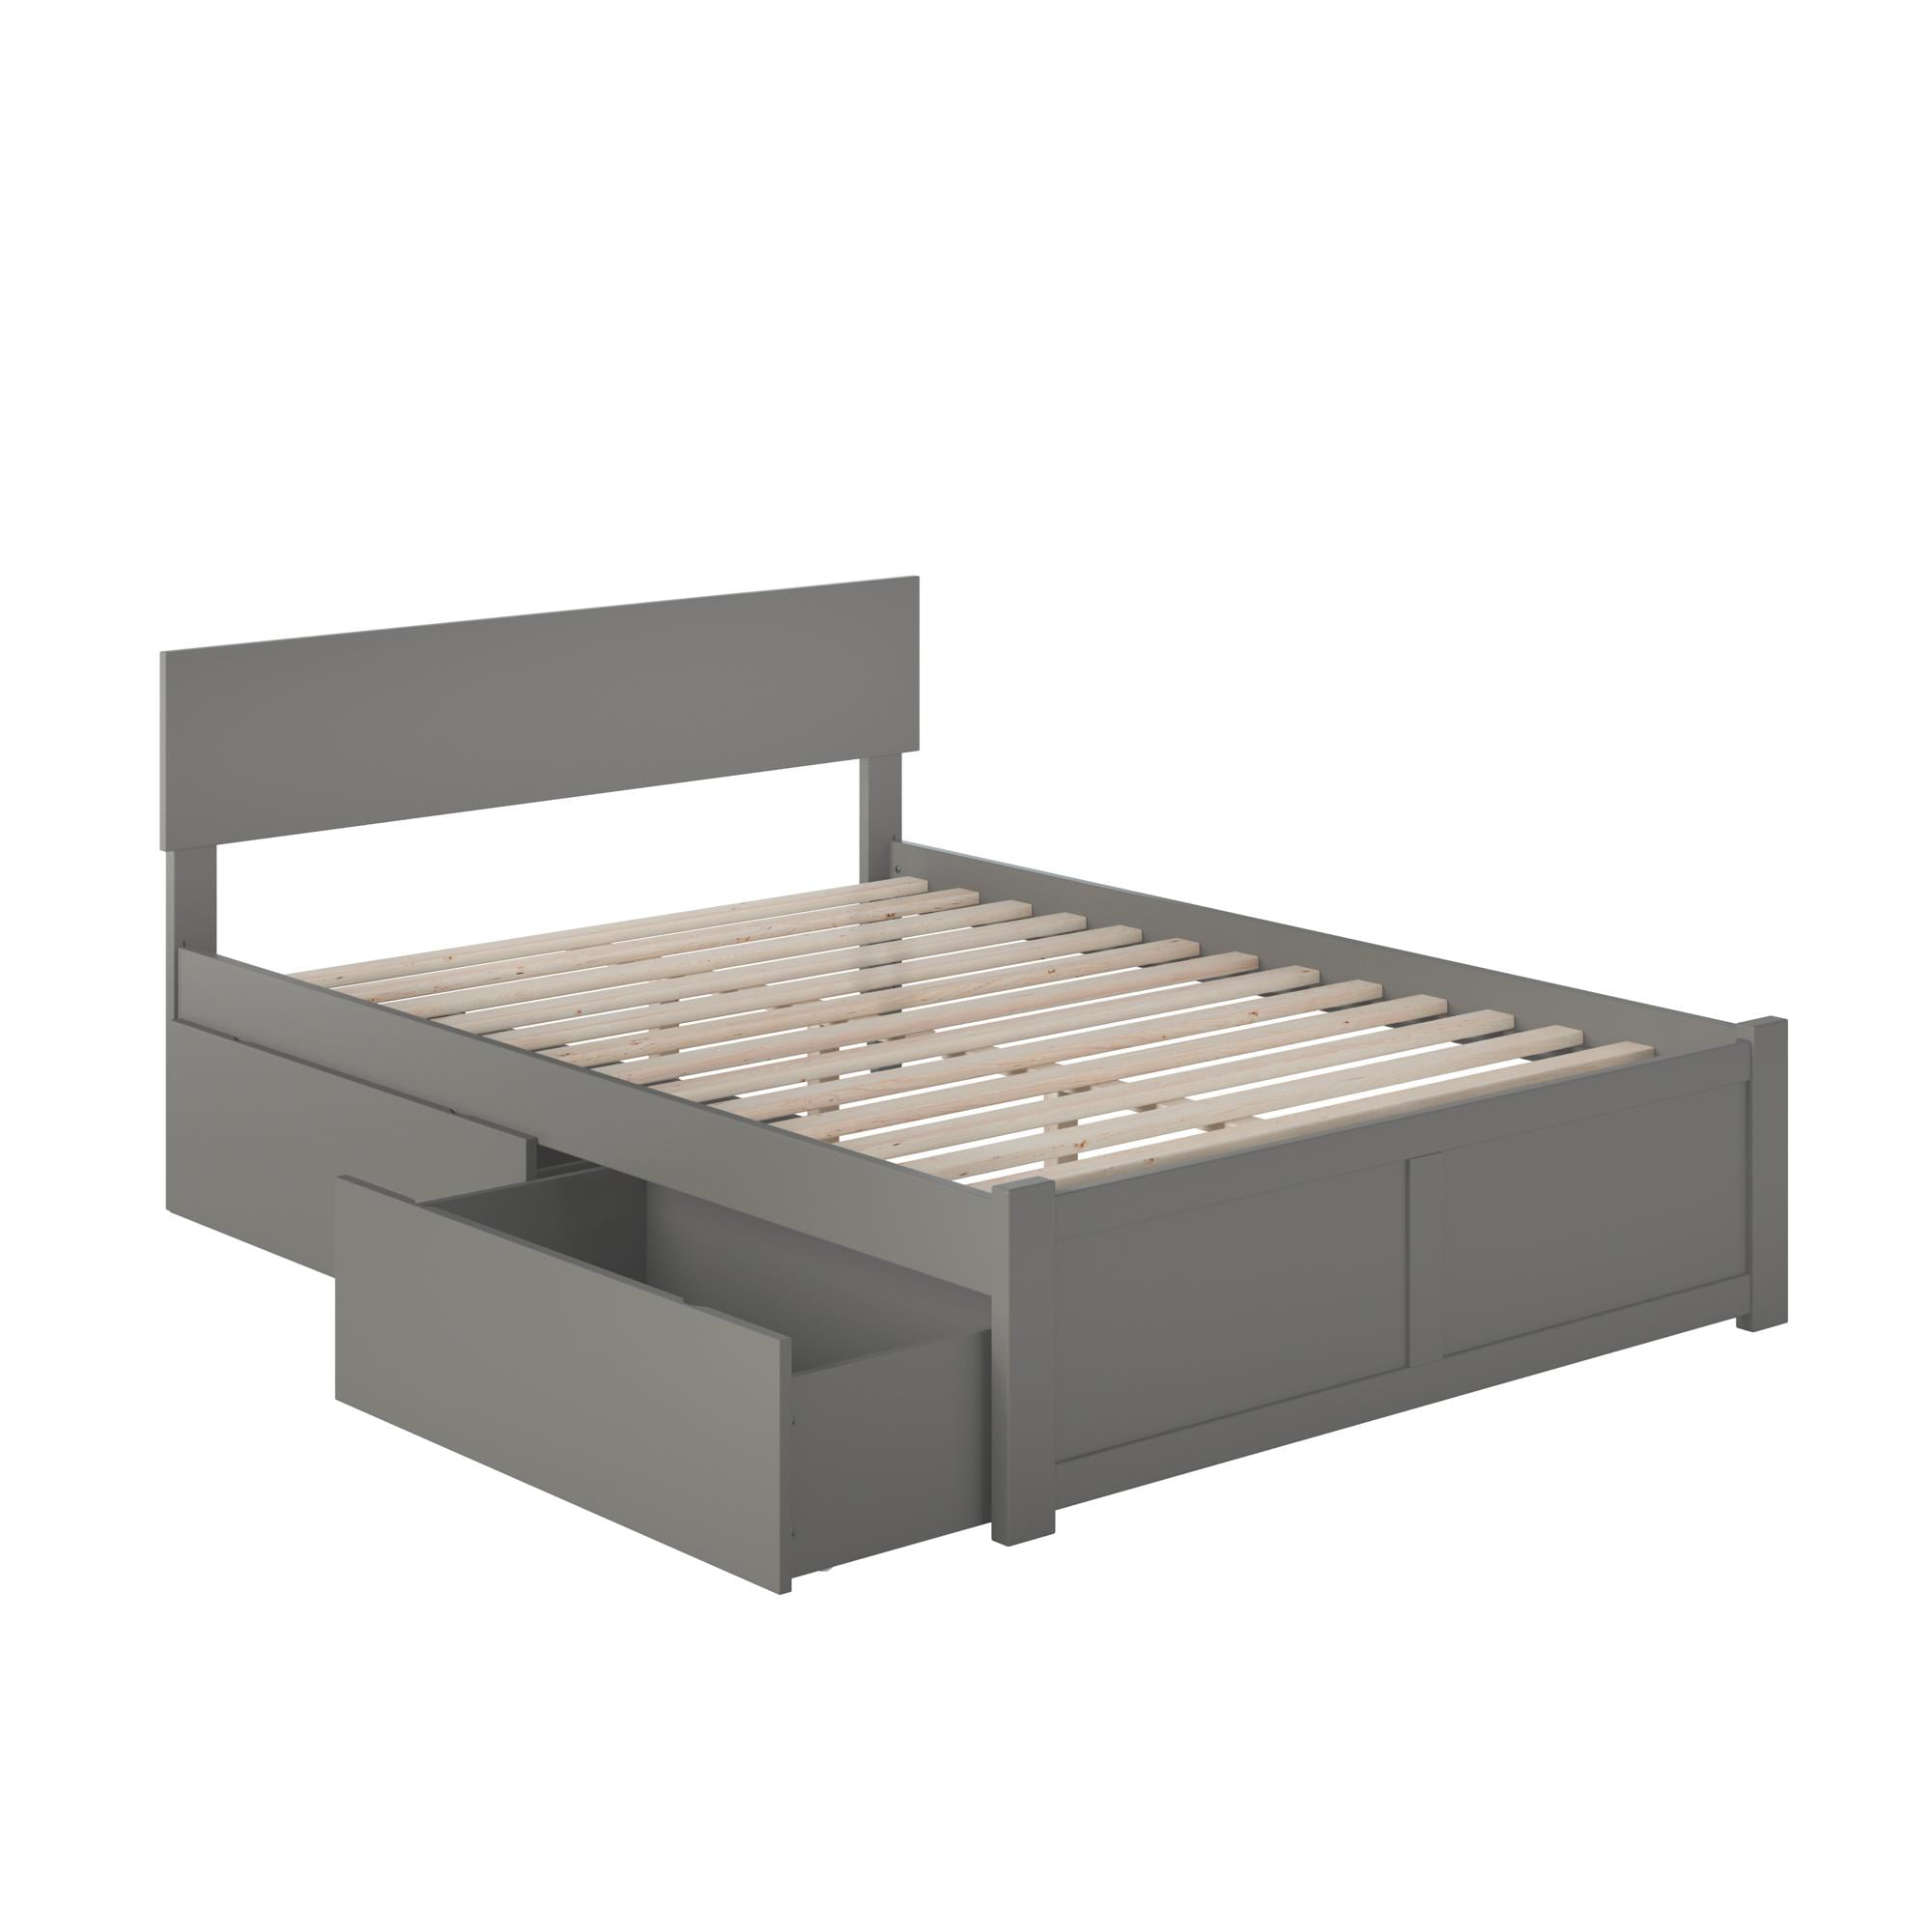 Ar8132119 Orlando Full Platform Bed With Flat Panel Foot Board & 2 Urban Bed Drawers - Grey